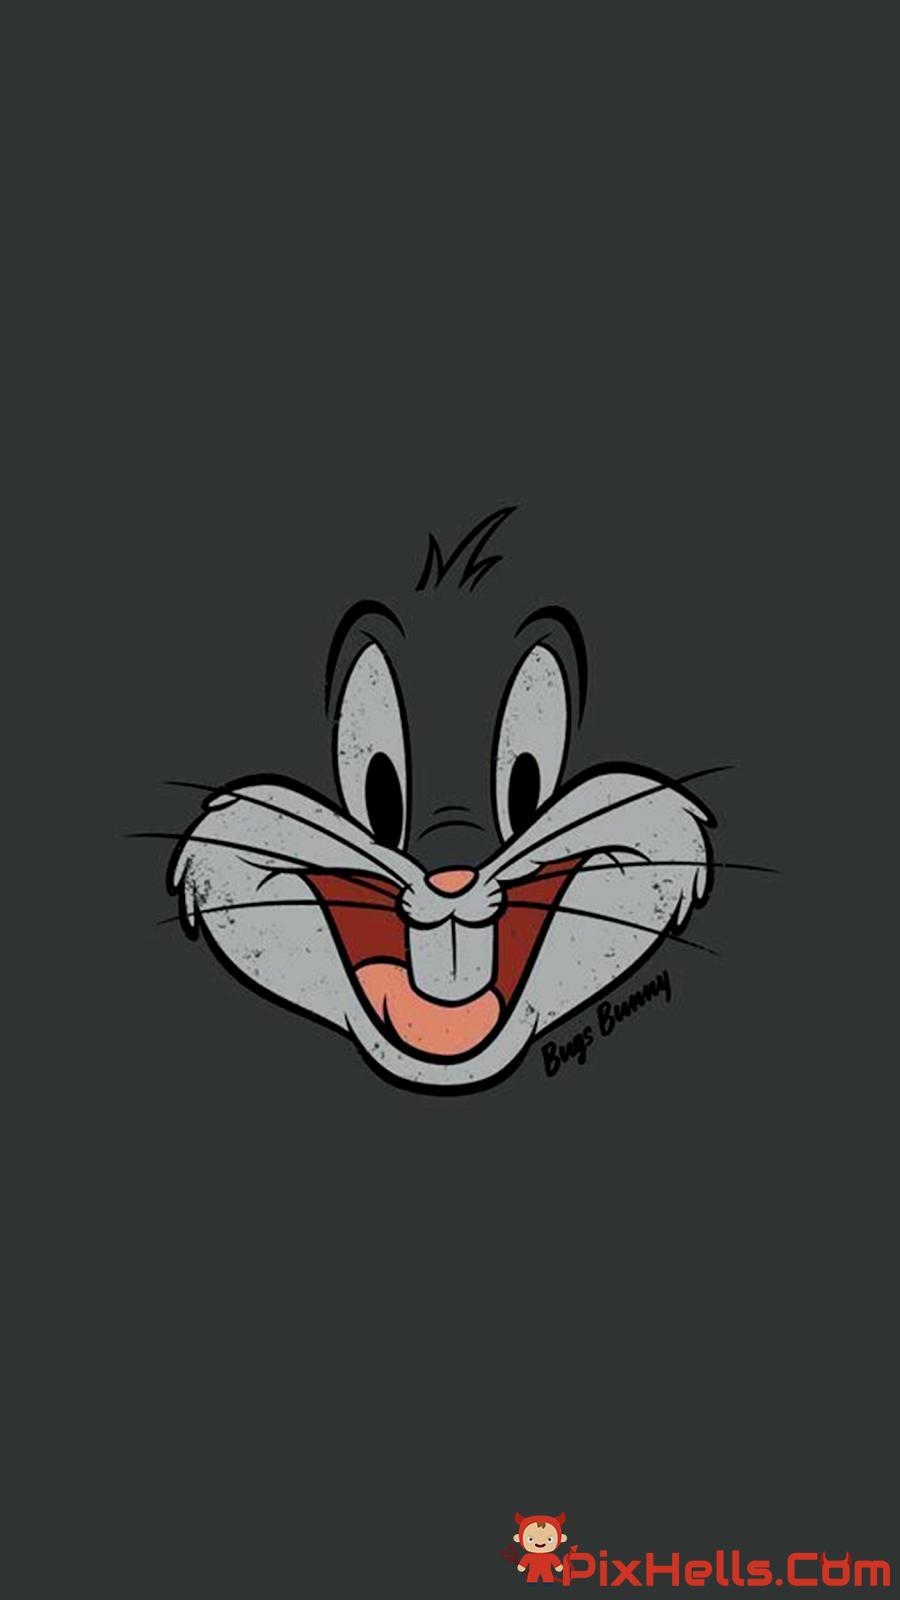 Bugs bunny wallpaper for iPhone and Android. - Bugs Bunny